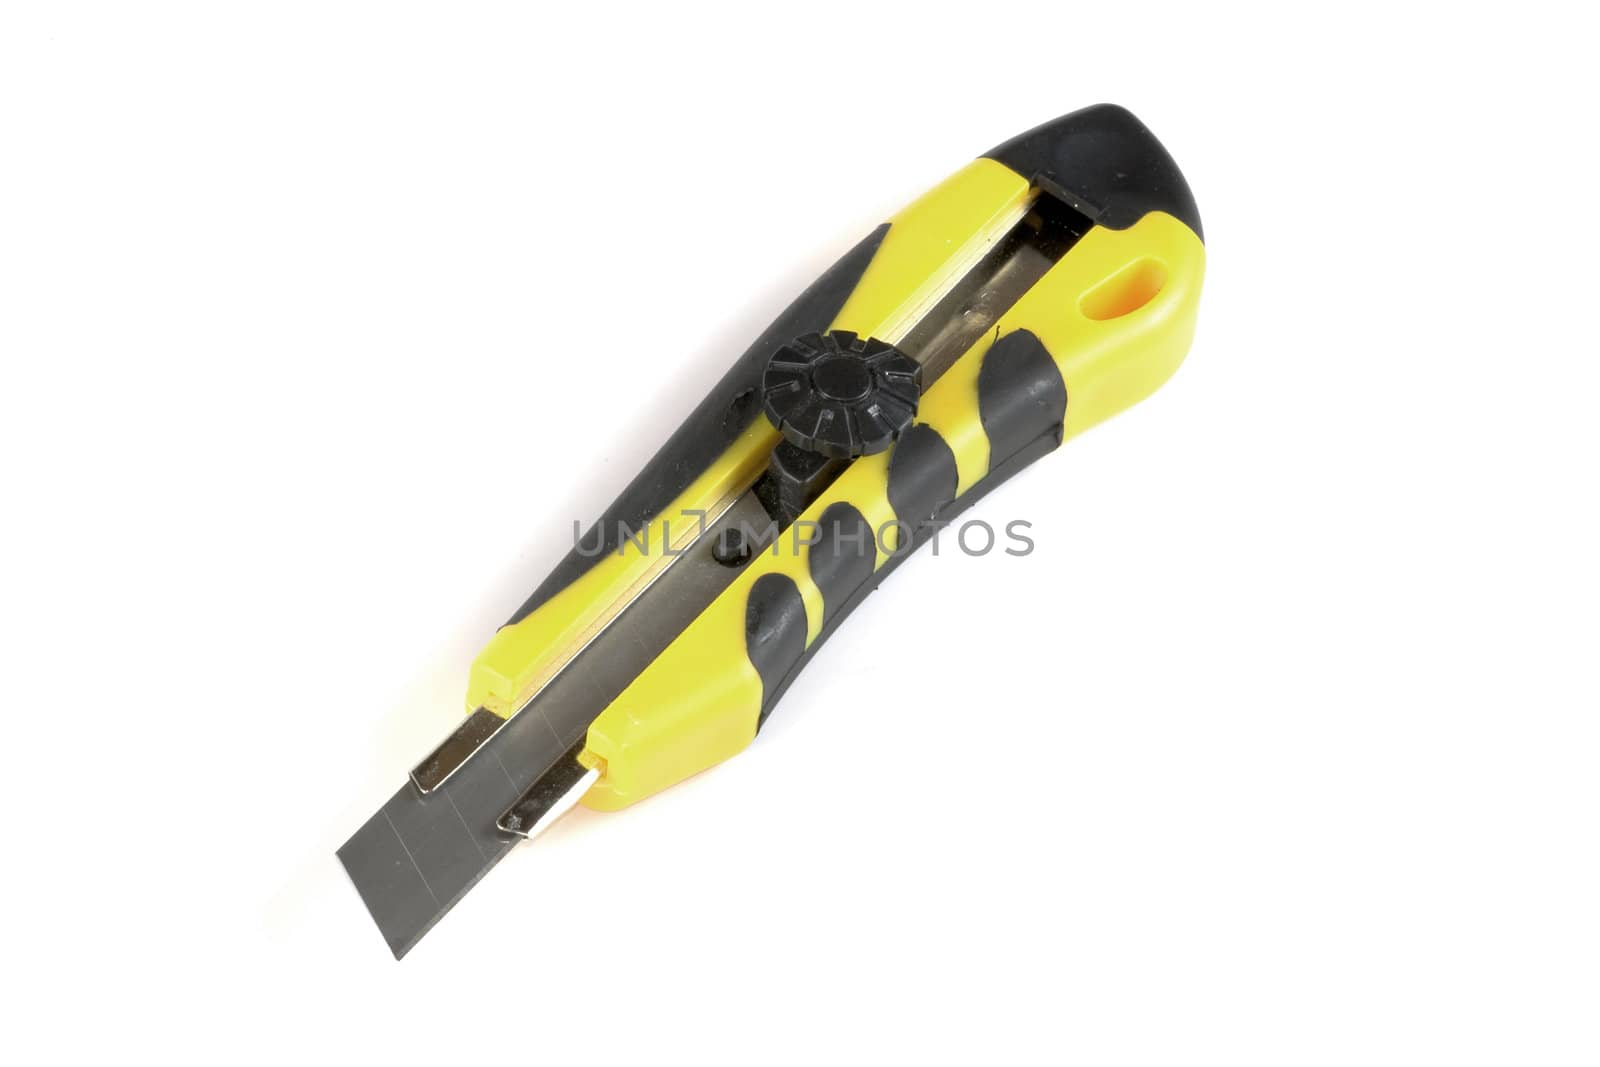 Utility knife with yellow transparent plastic handle